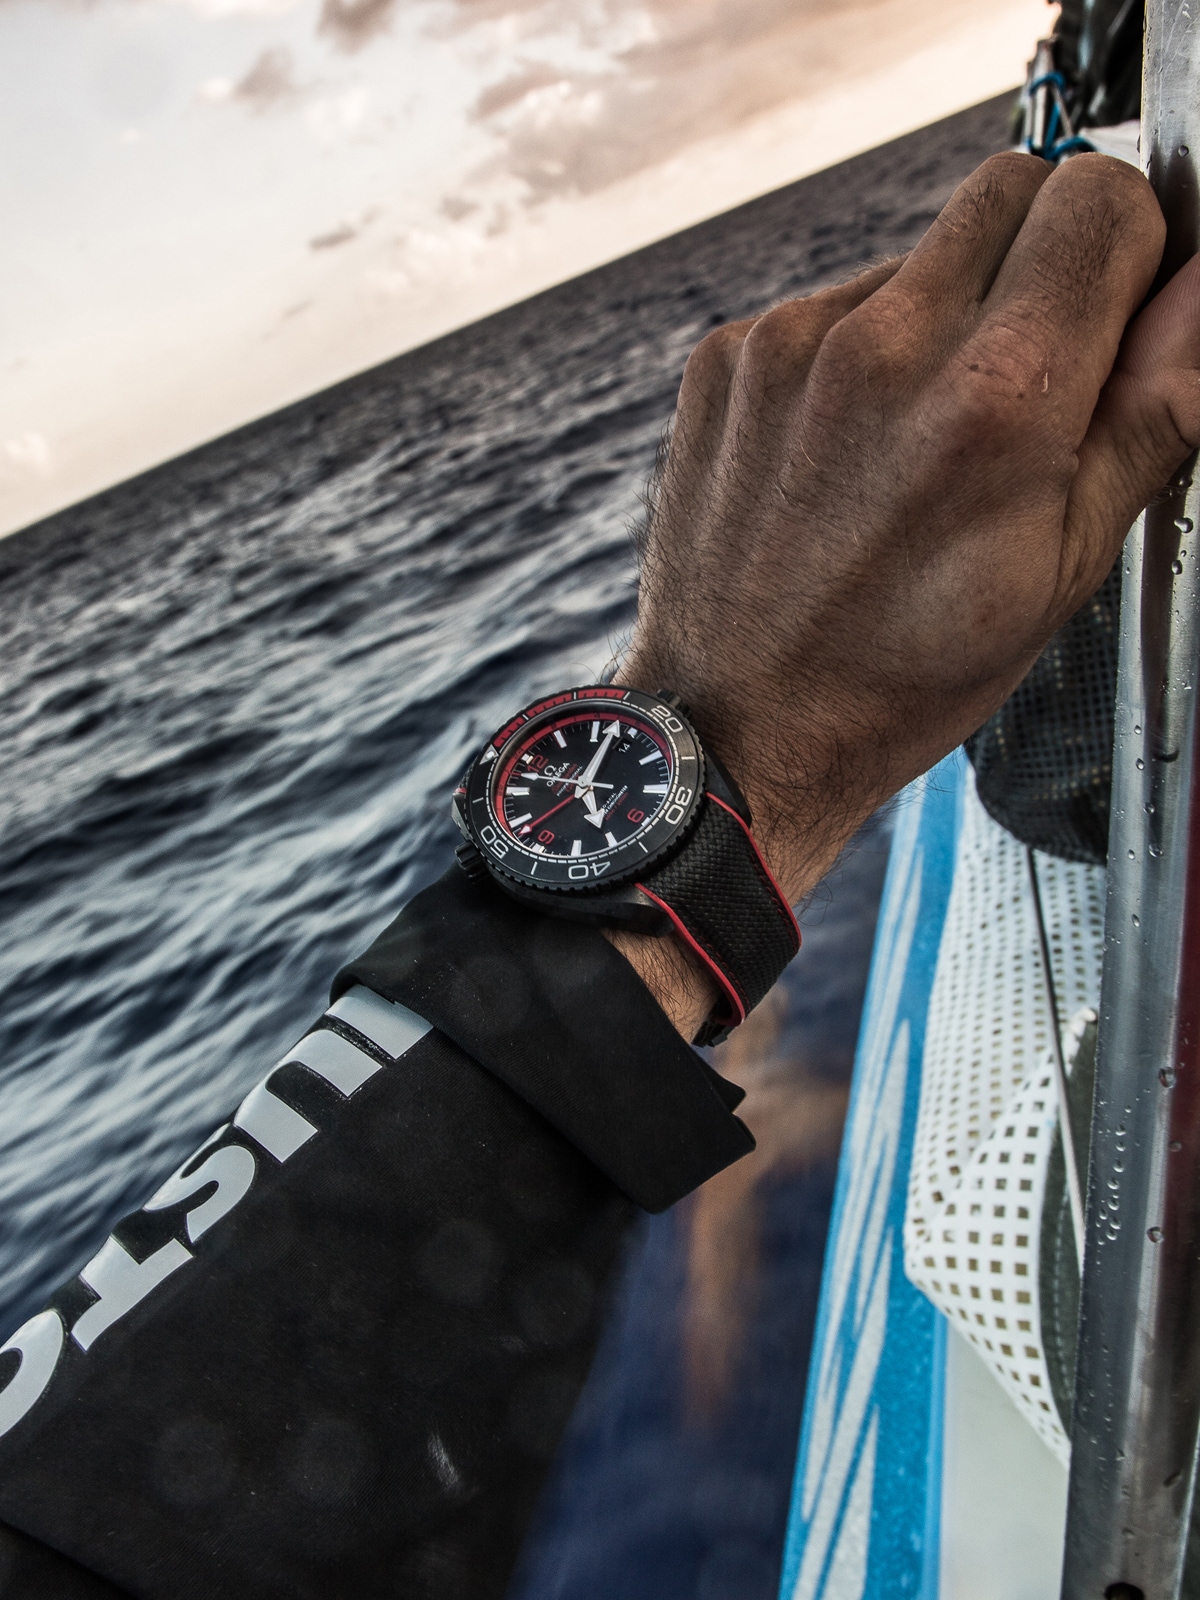 Omega Seamaster Planet Ocean 600M Deep Black GMT 215.63.46.22.01.001Omega Seamaster Planet Ocean 600M Deep Black Red, GMT 45.5mm, Co-Axial Master Chronometer